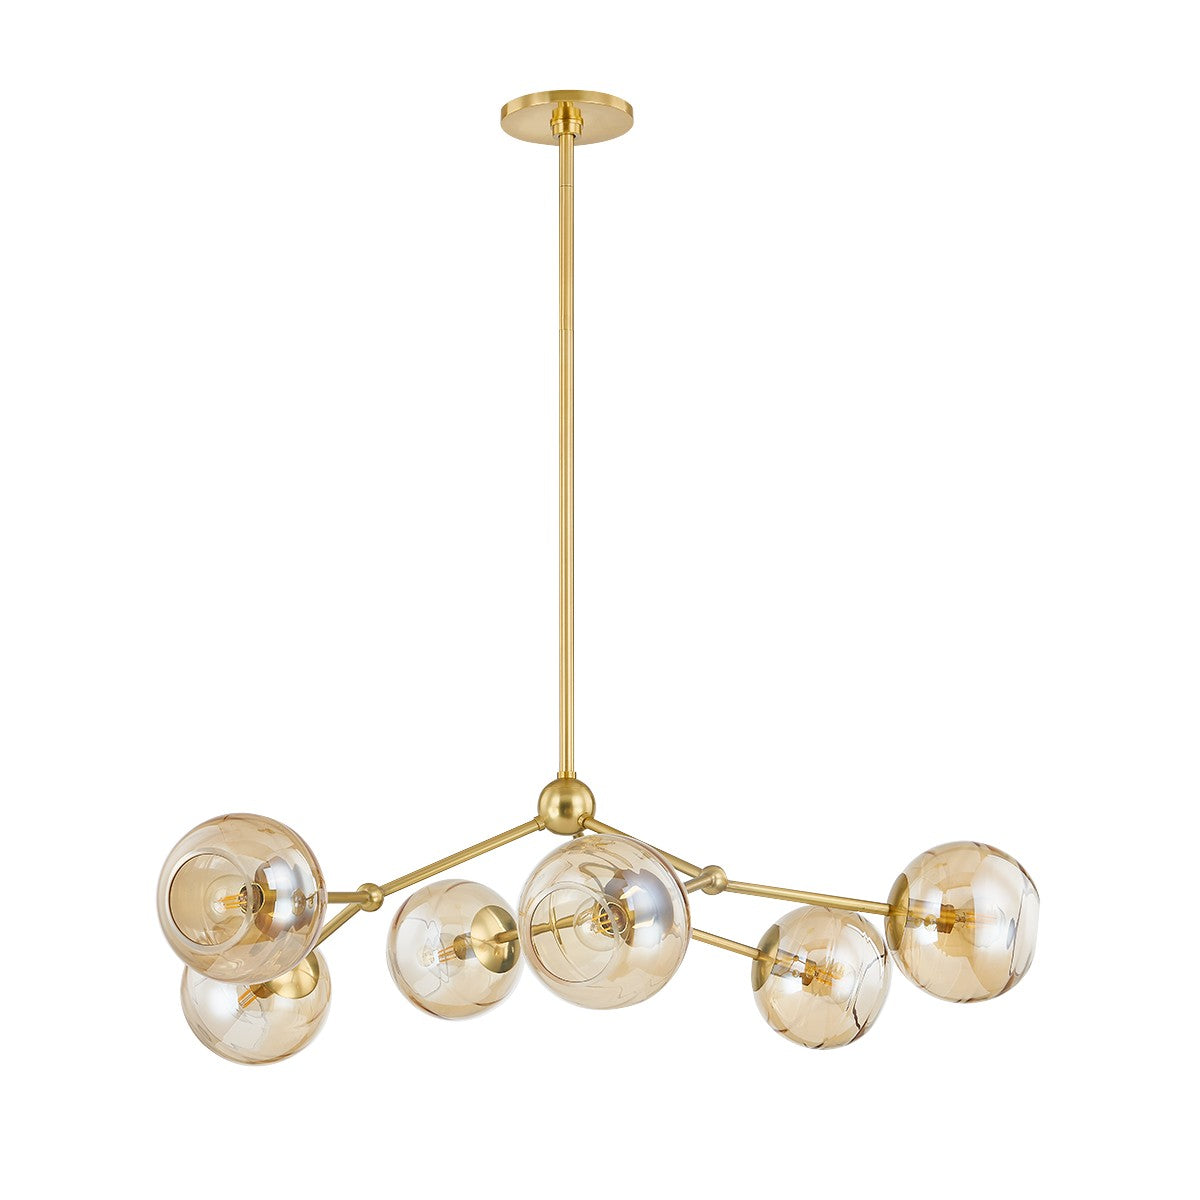 Mitzi - H861806-AGB - Six Light Chandelier - Trixie - Aged Brass